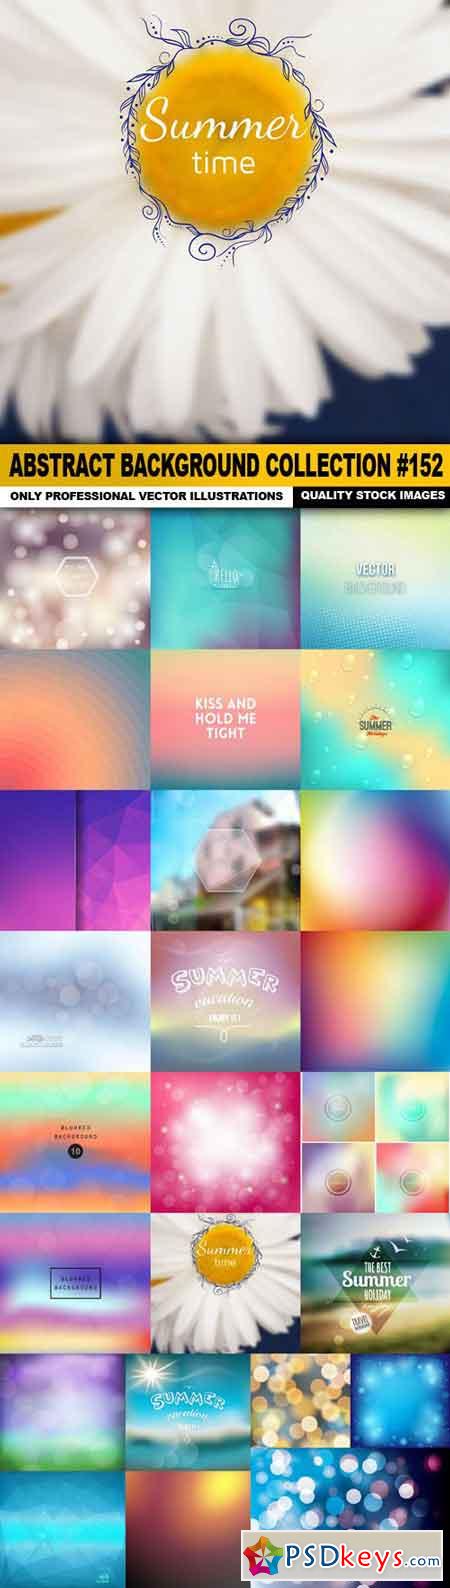 Abstract Background Collection #152 - 25 Vector